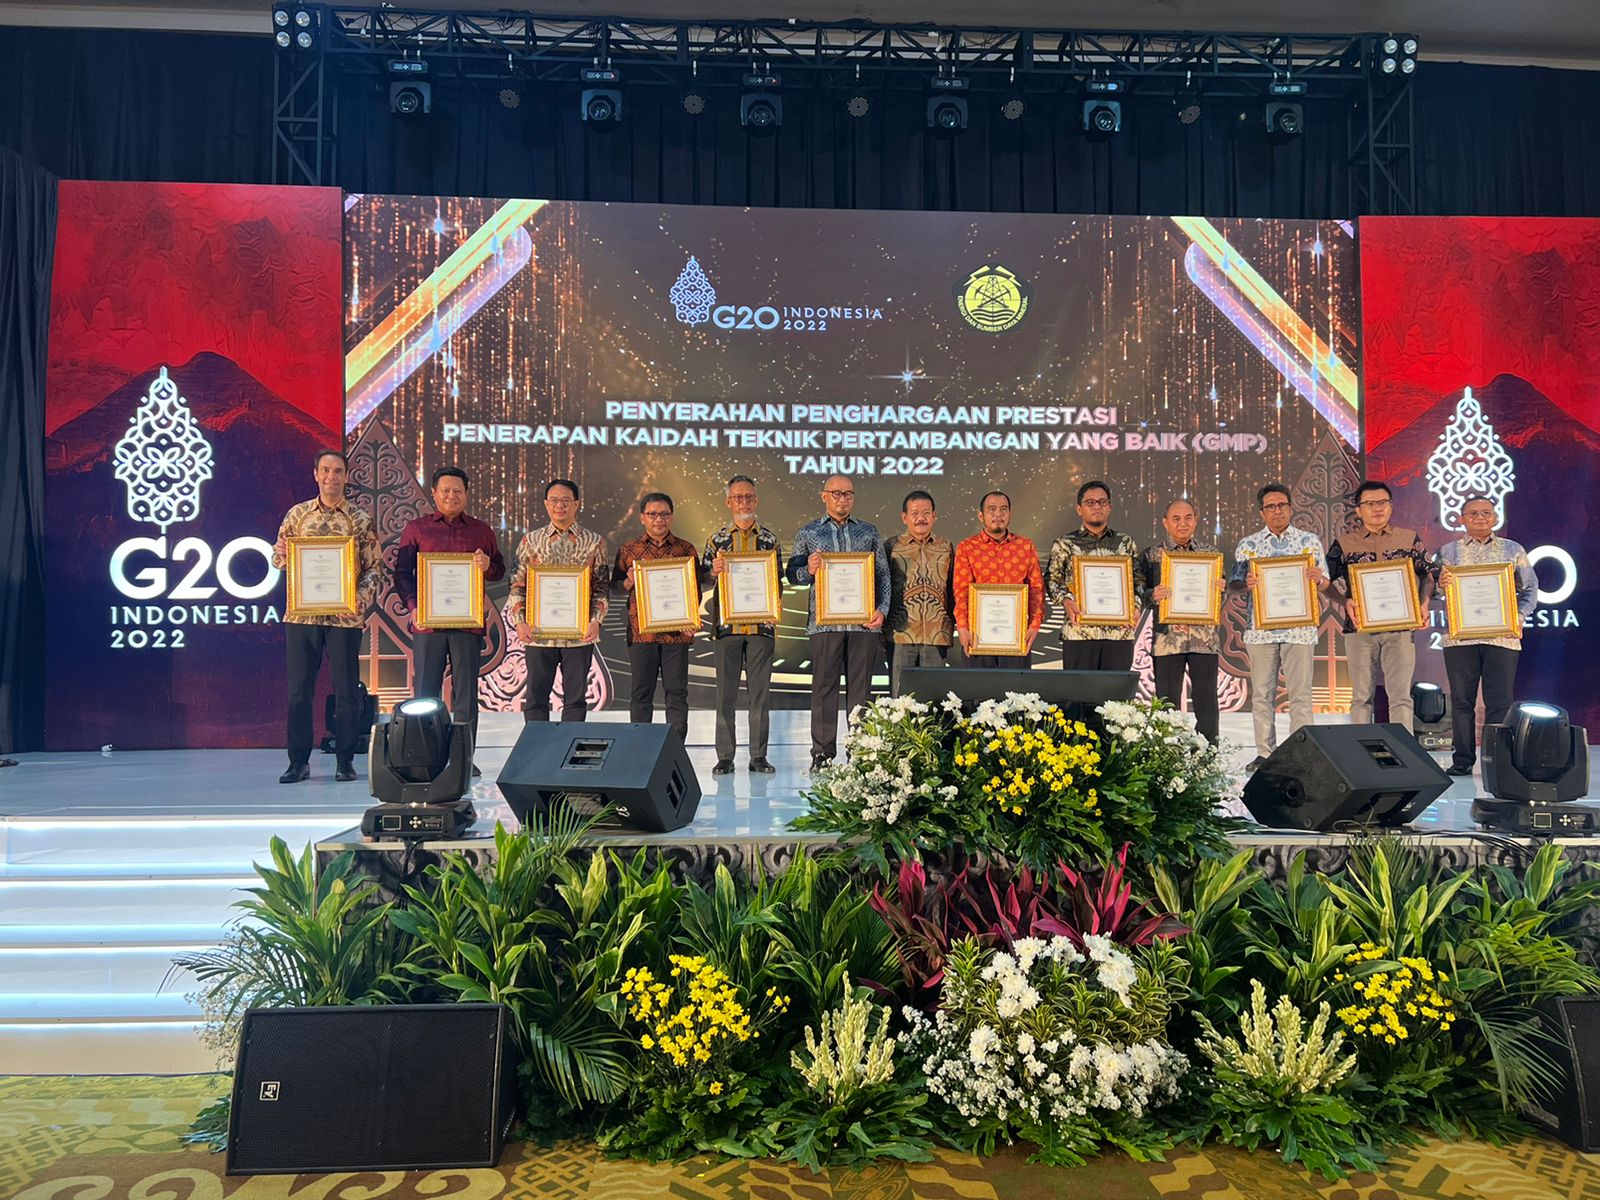 Utama Award for Mining Engineering Management Aspects for groups of business entities holding KK, IUP BUMN, IUP PMA, IUPK mineral commodities from the Ministry of Energy and Mineral Resources (ESDM